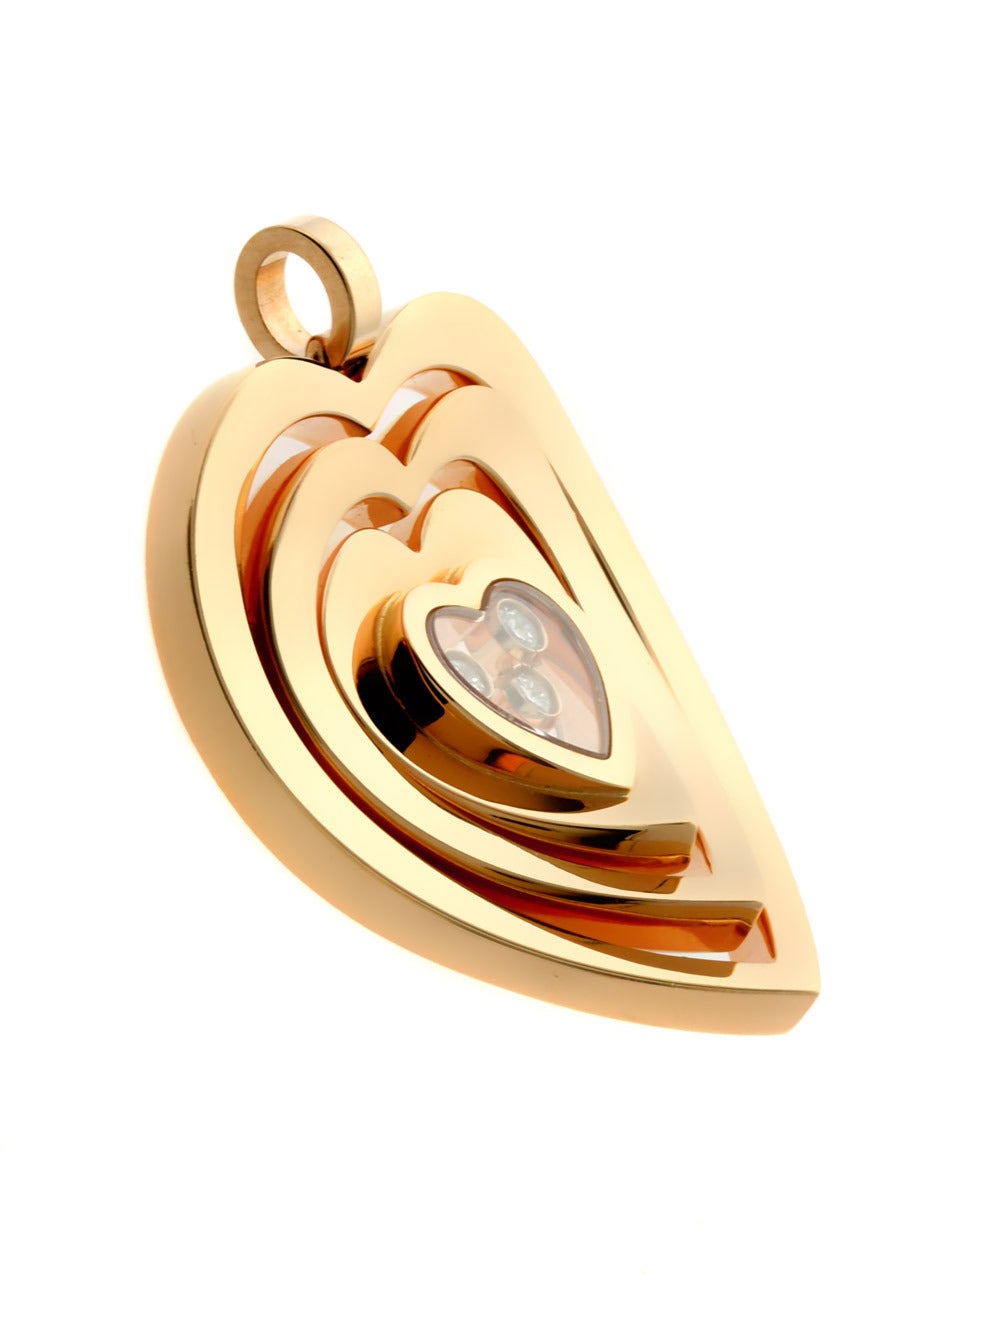 A beautiful Chopard Happy Diamond pendant enhanced with 3 of the finest Chopard round brilliant cut diamonds (.15ct) in warm 18k rose gold.

Pendant Dimensions: 1.18″ Inches wide by 1.29″ Inches in length

Inventory ID: 0000254

Brand New w/